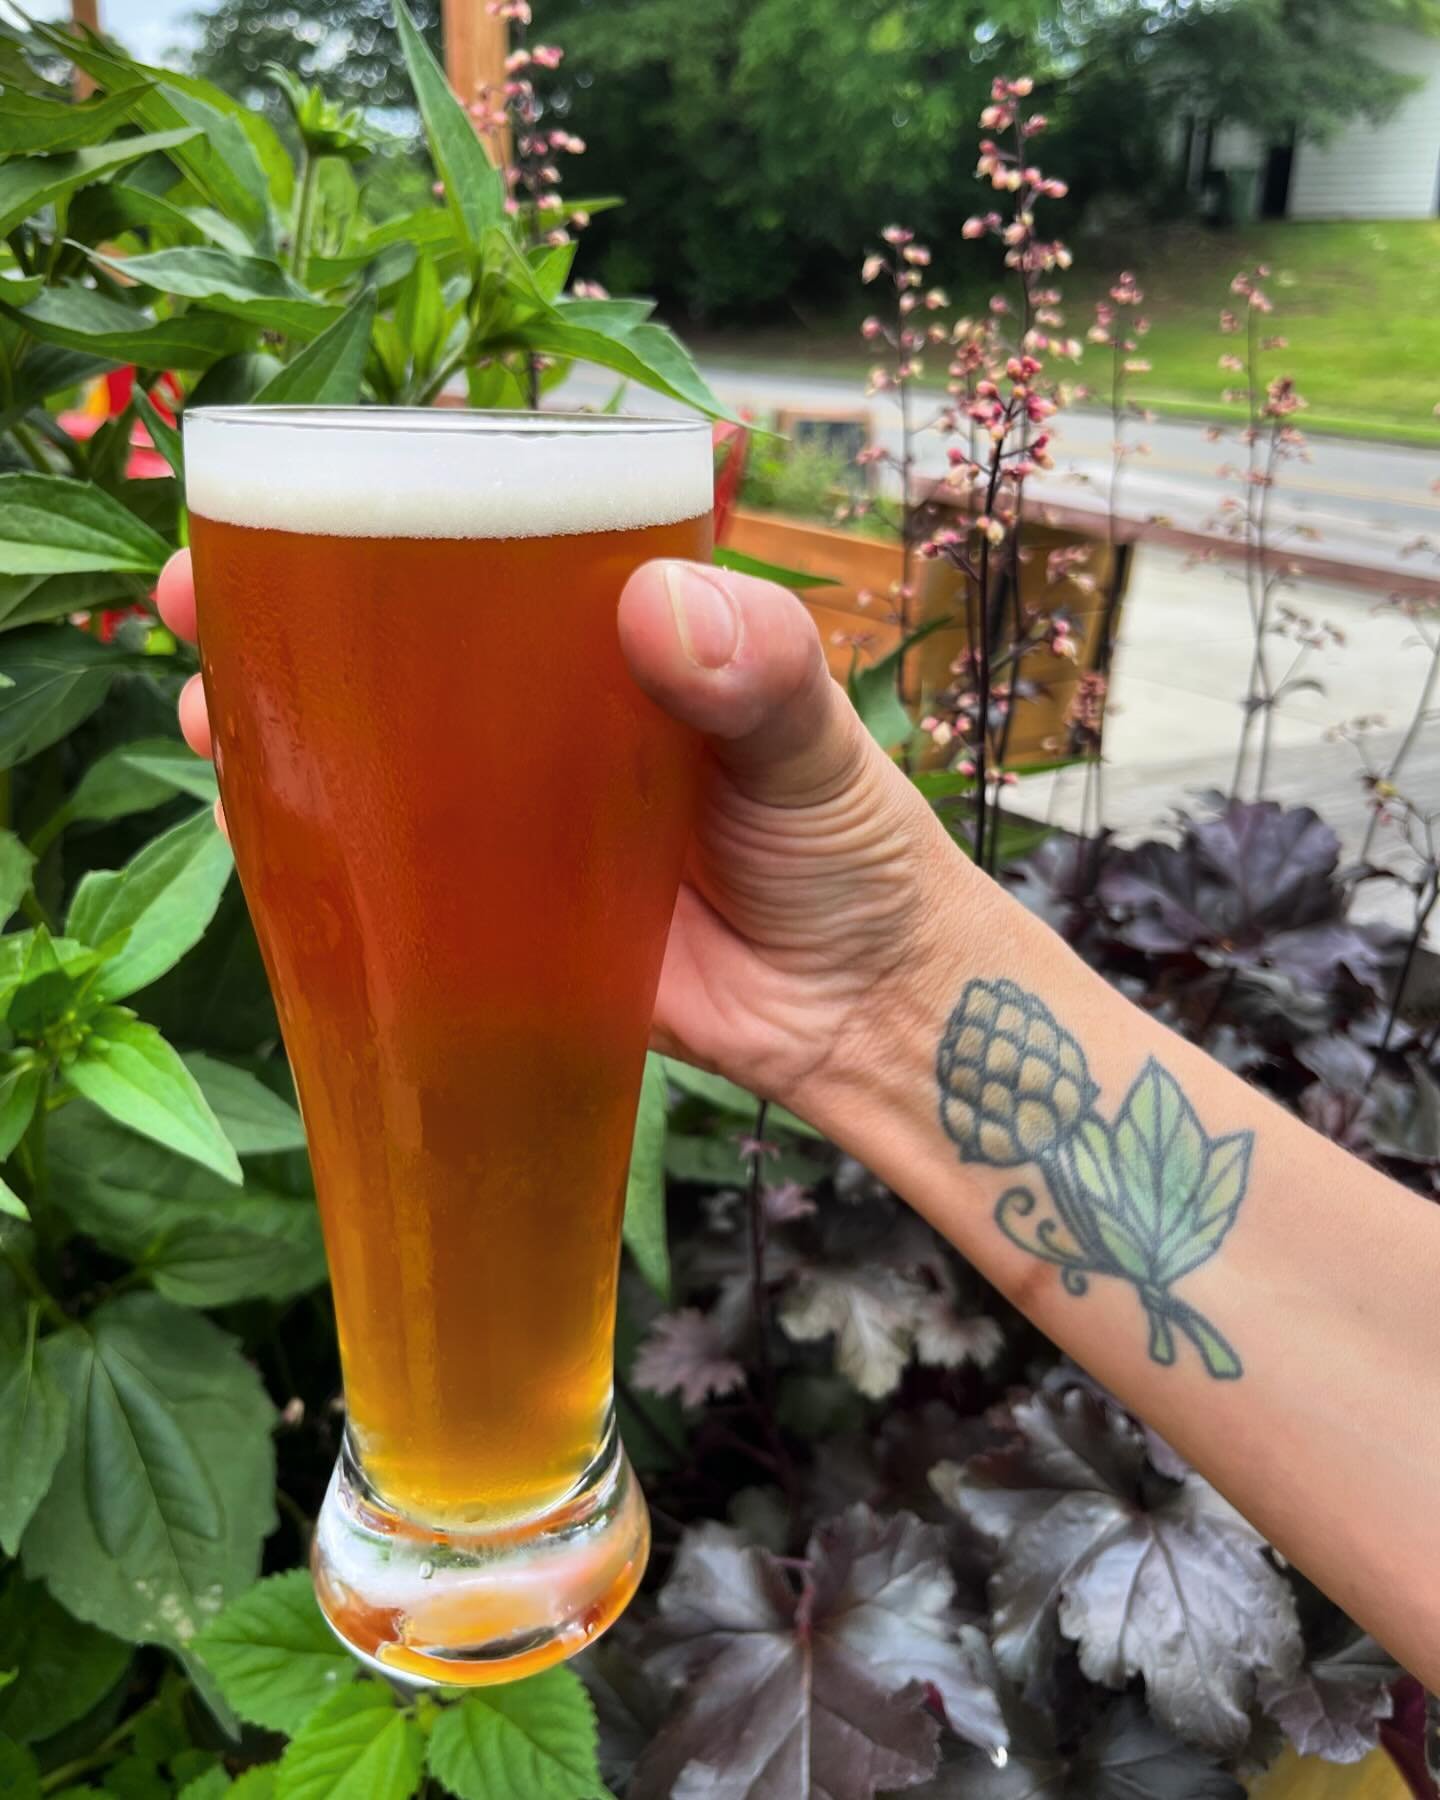 Good news &amp; bad news: The good news is Mosaic Thump is here for #freshfriday!! Brewed with local malt and single hopped with Mosiac with notes of citrus, floral, and earthiness. This traditional west coast IPA is 5.2% abv. &amp; pairs well with o